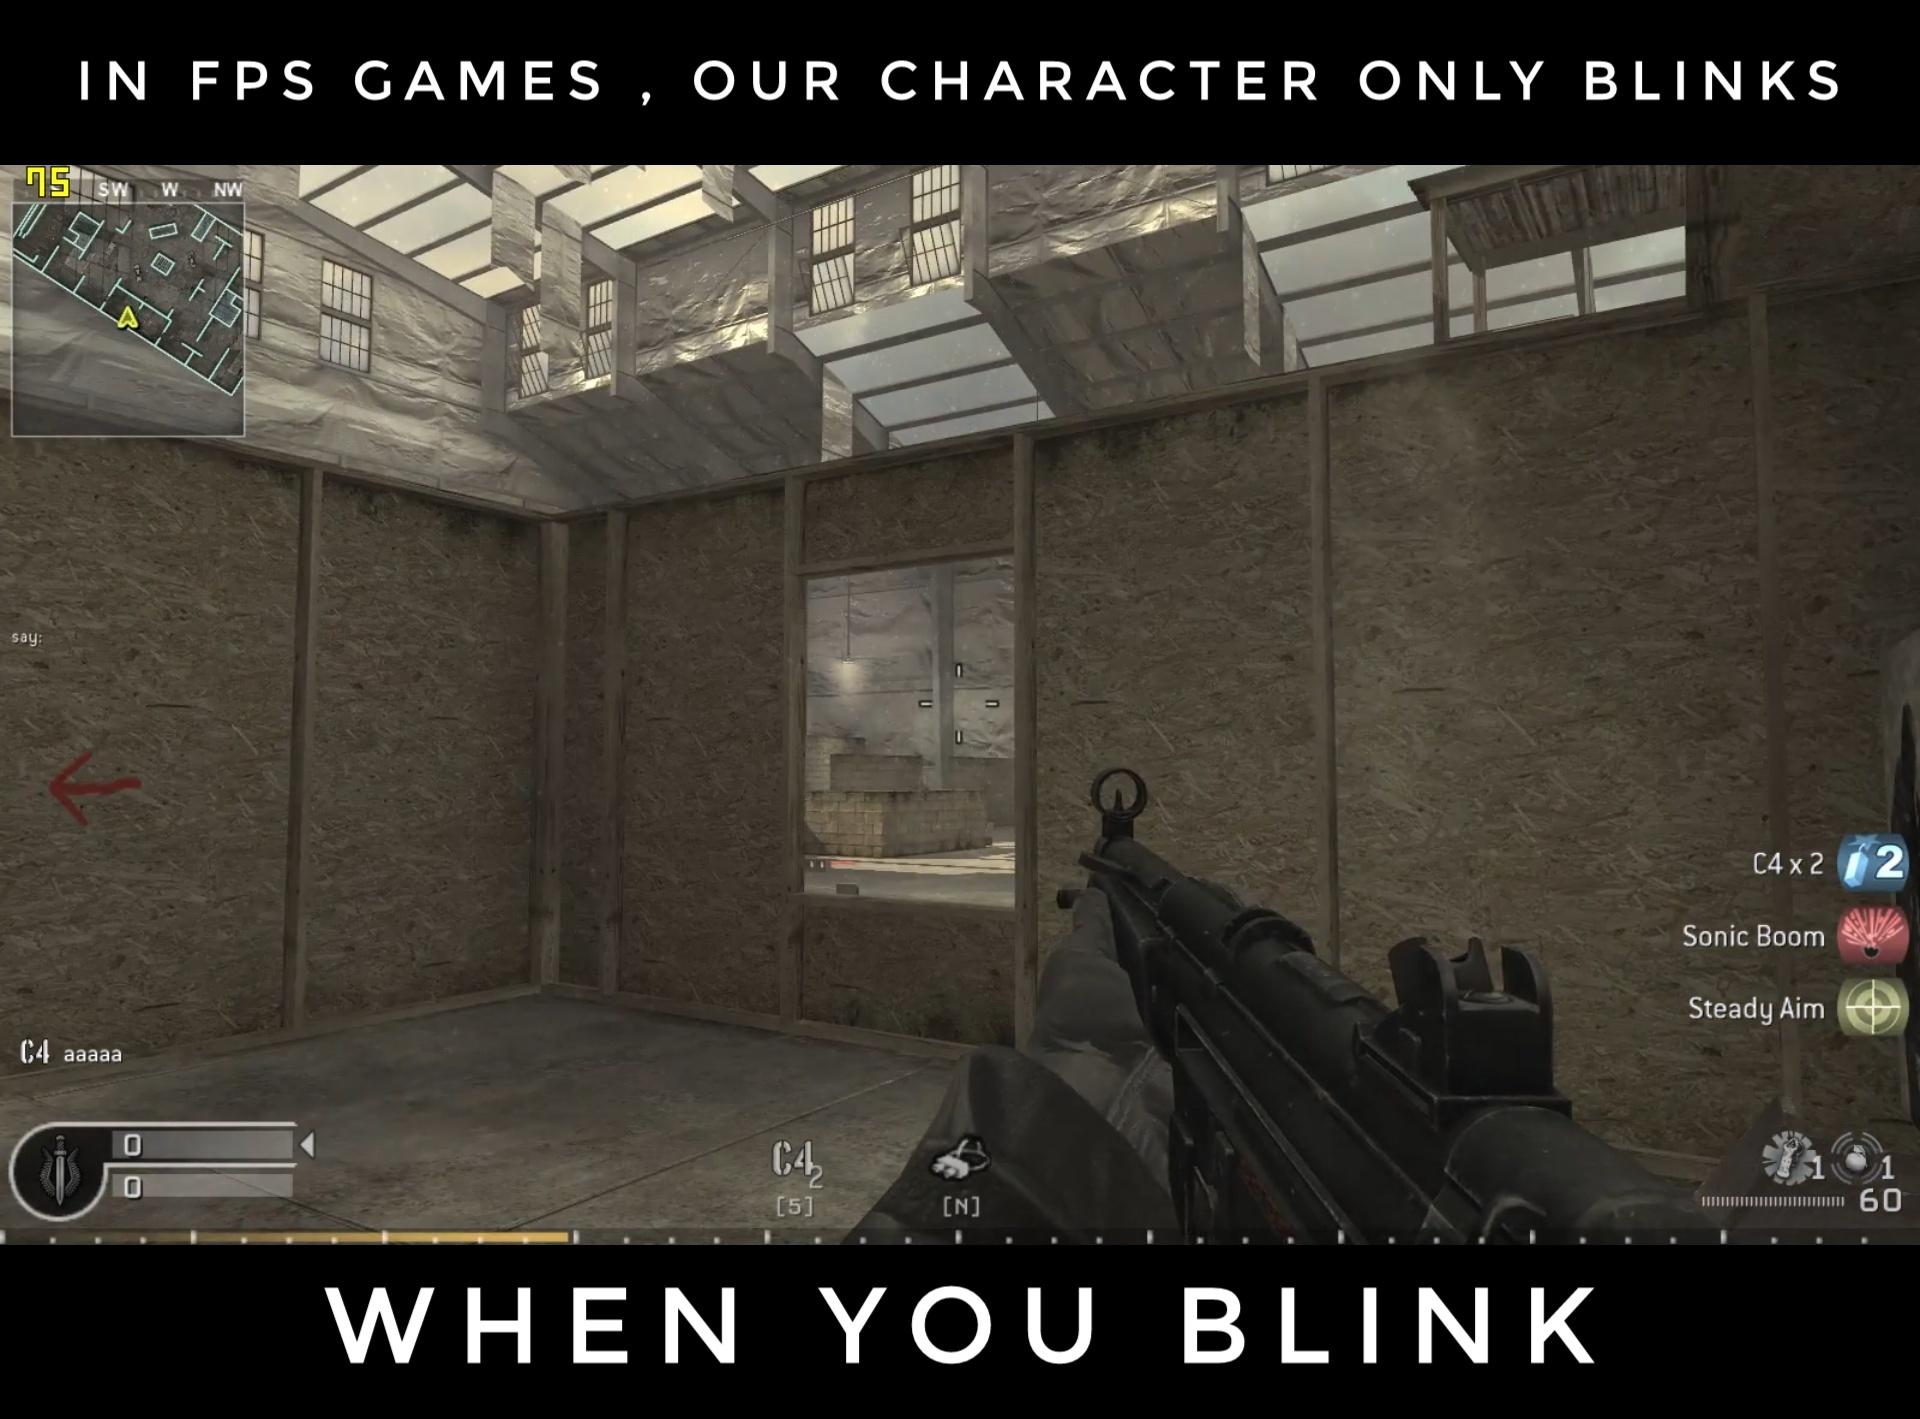 fps gaming memes - In Fps Games , Our Character Only Blinks 05 Sw Wnw say C4 x 2 Sonic Boom Steady Aim C4 aaaaa C4 5 N 100 ||||||||||||||||||||Ii 6 0 When You Blink